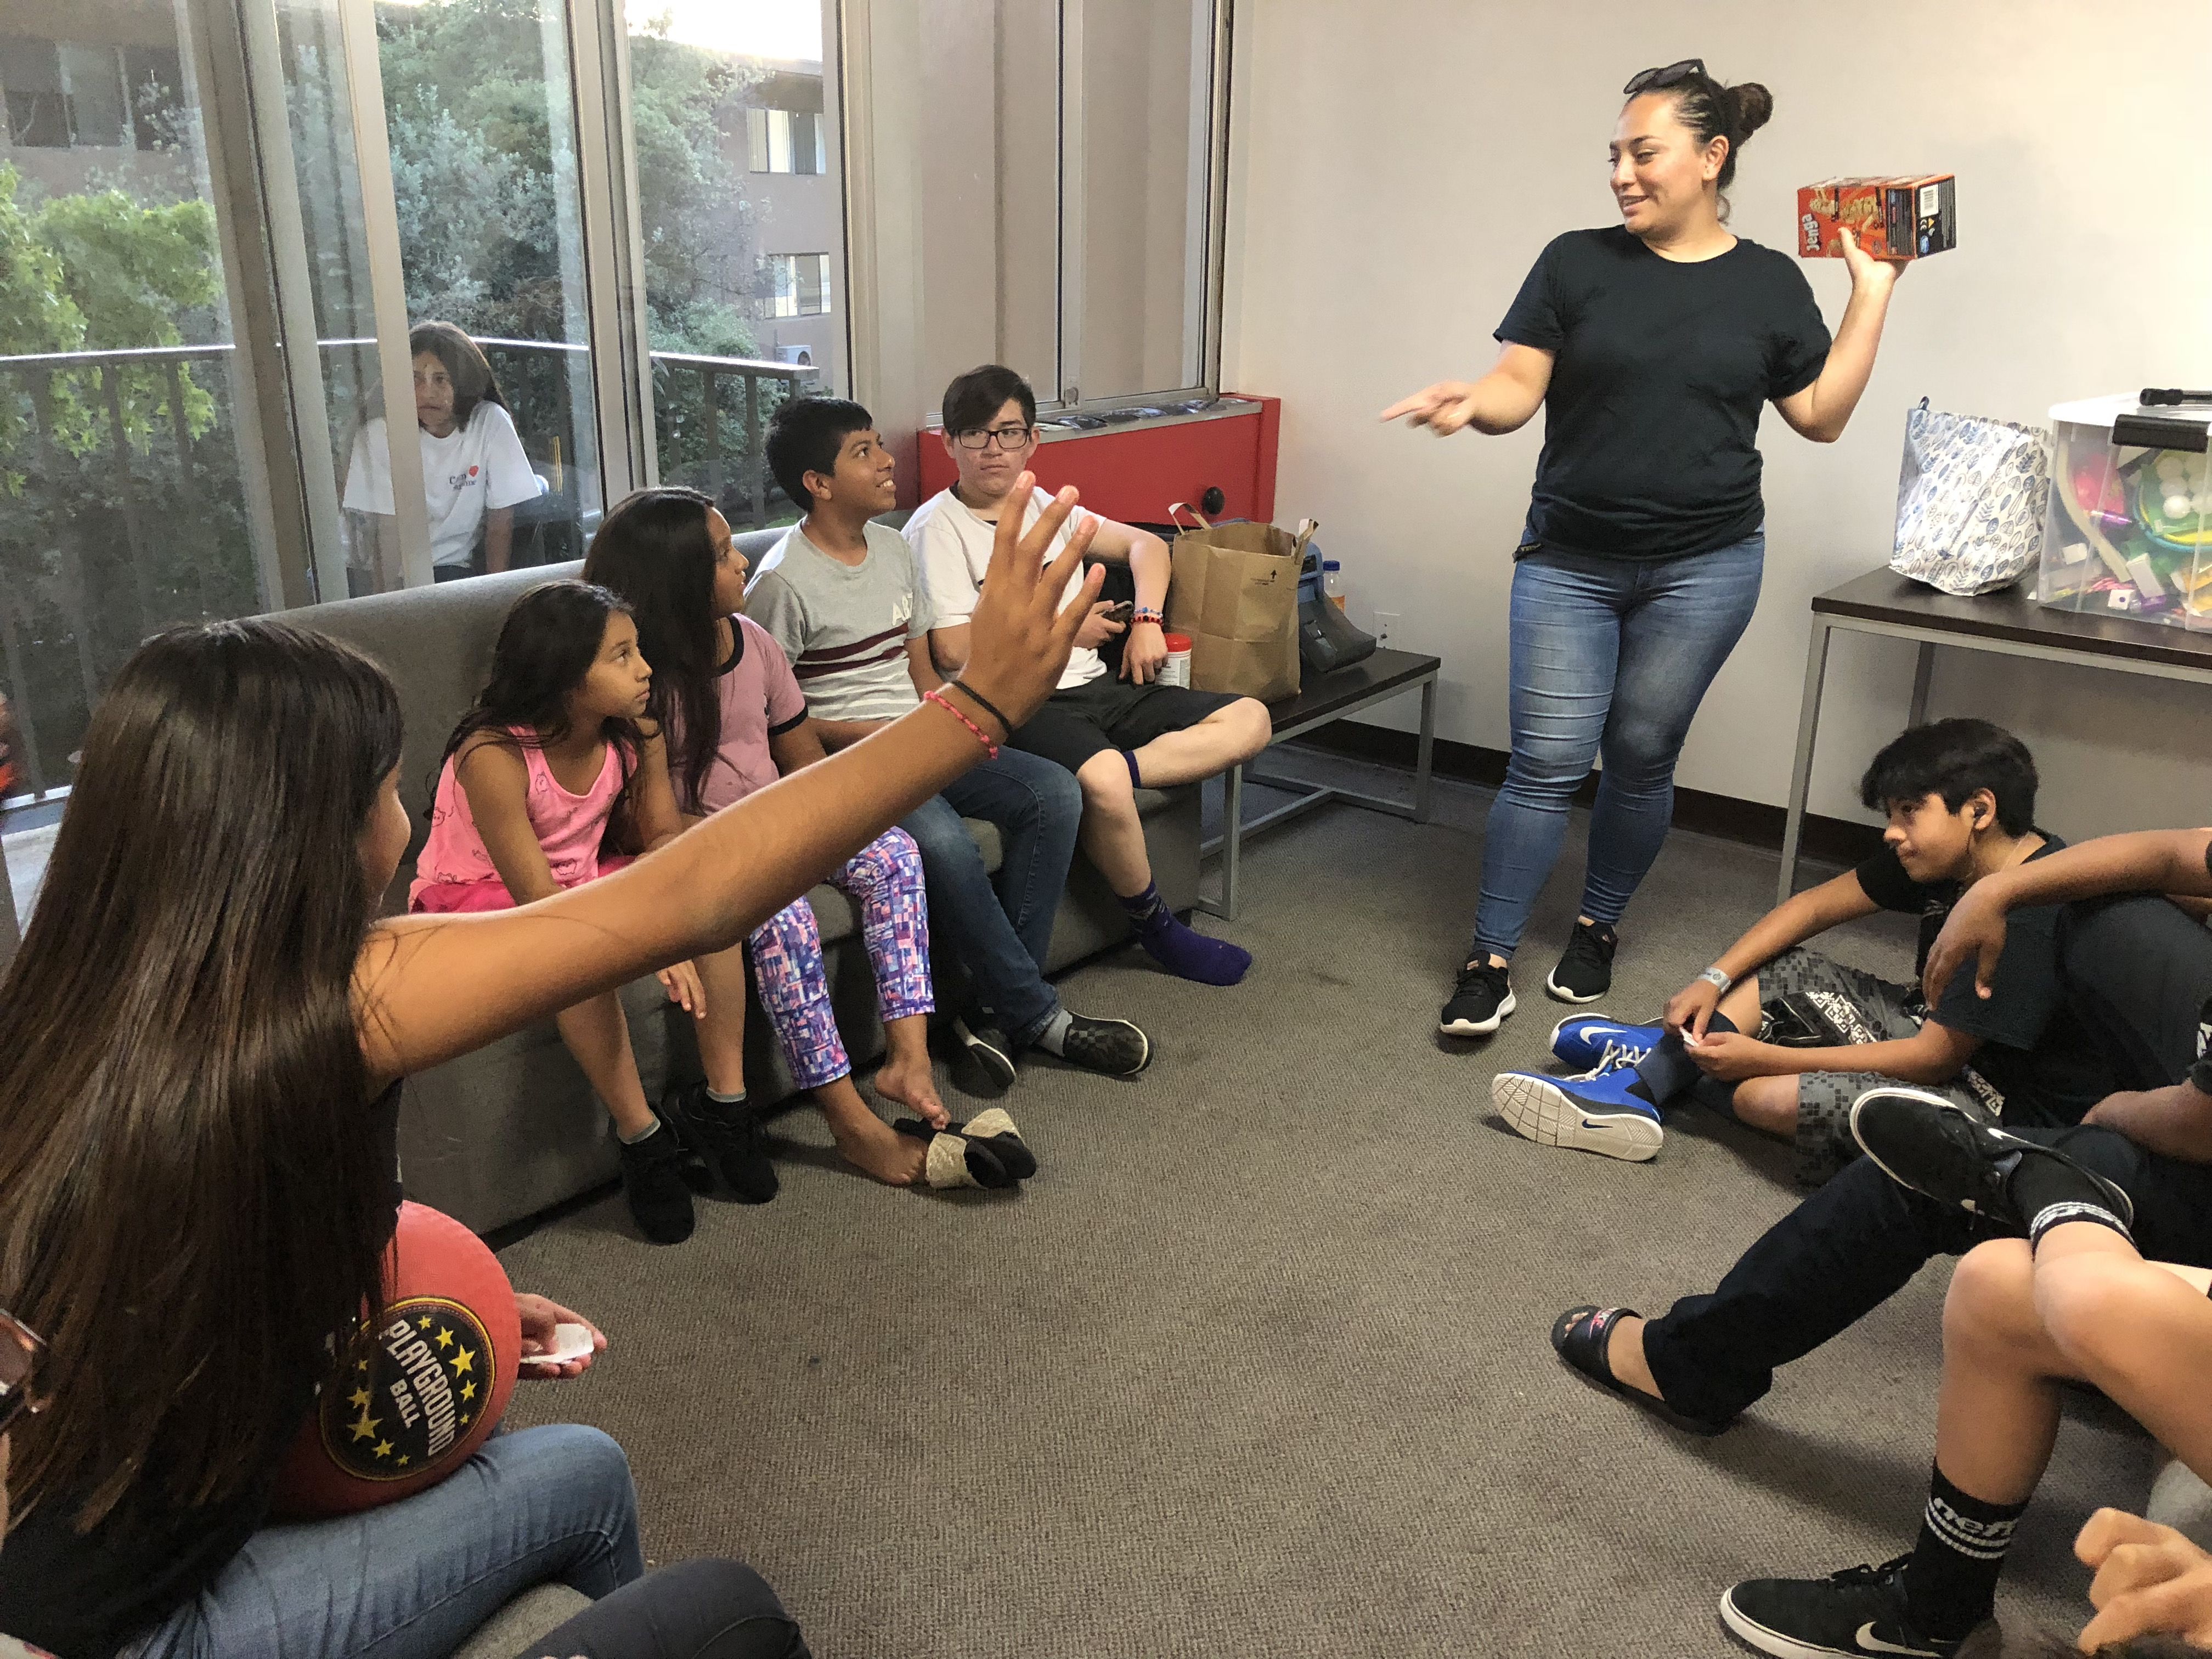 On the last night of Camp Suzanne, kids participate in a raffle in the common area of a Holy Names University dorm. Image by Jaime Joyce for TIME Edge. California, 2018.